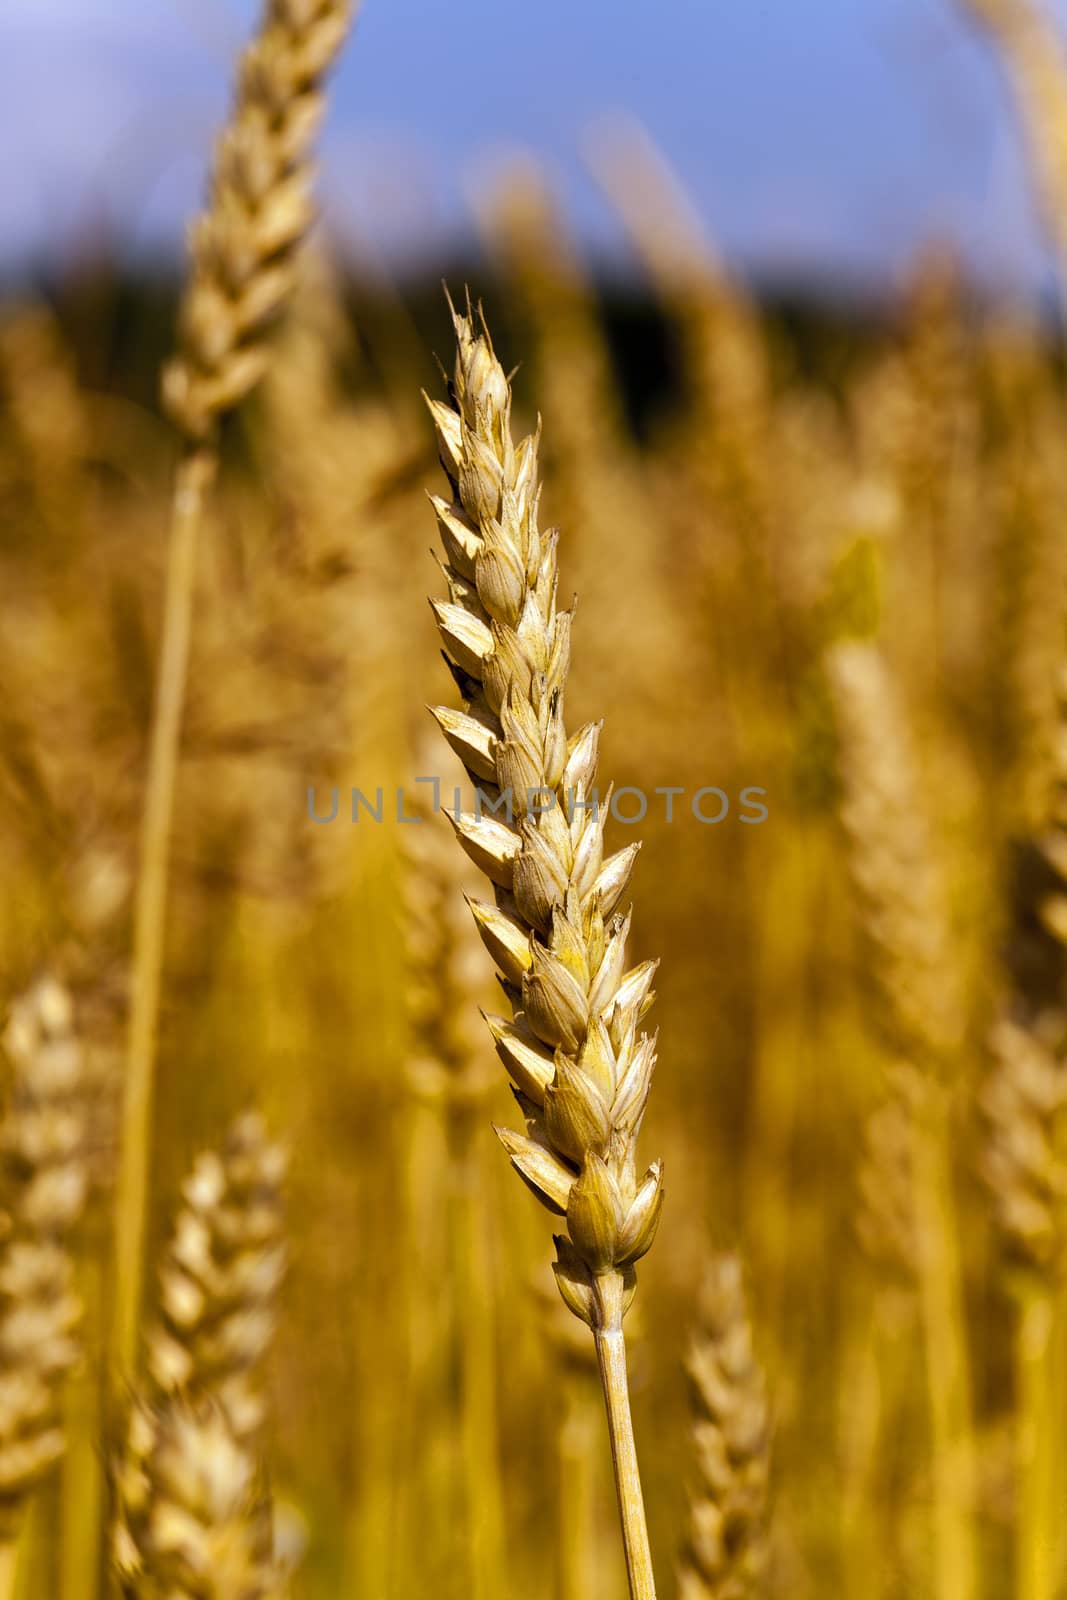   the ripened ears of cereals photographed by a close up